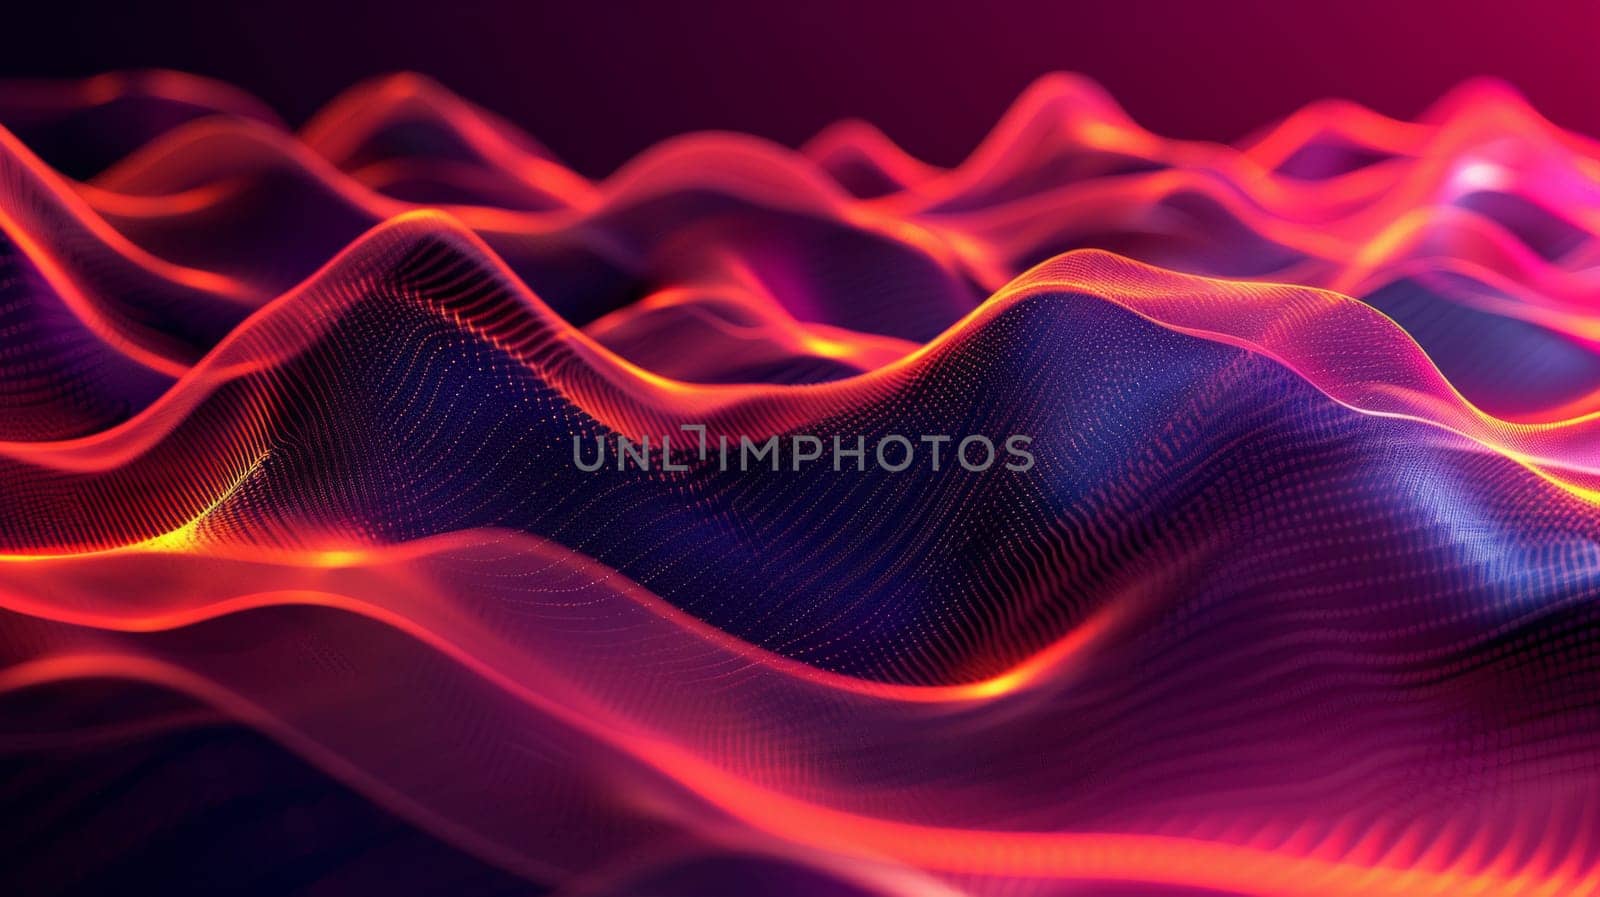 abstract tech wallpaper of red and blue waves with a purple background by papatonic